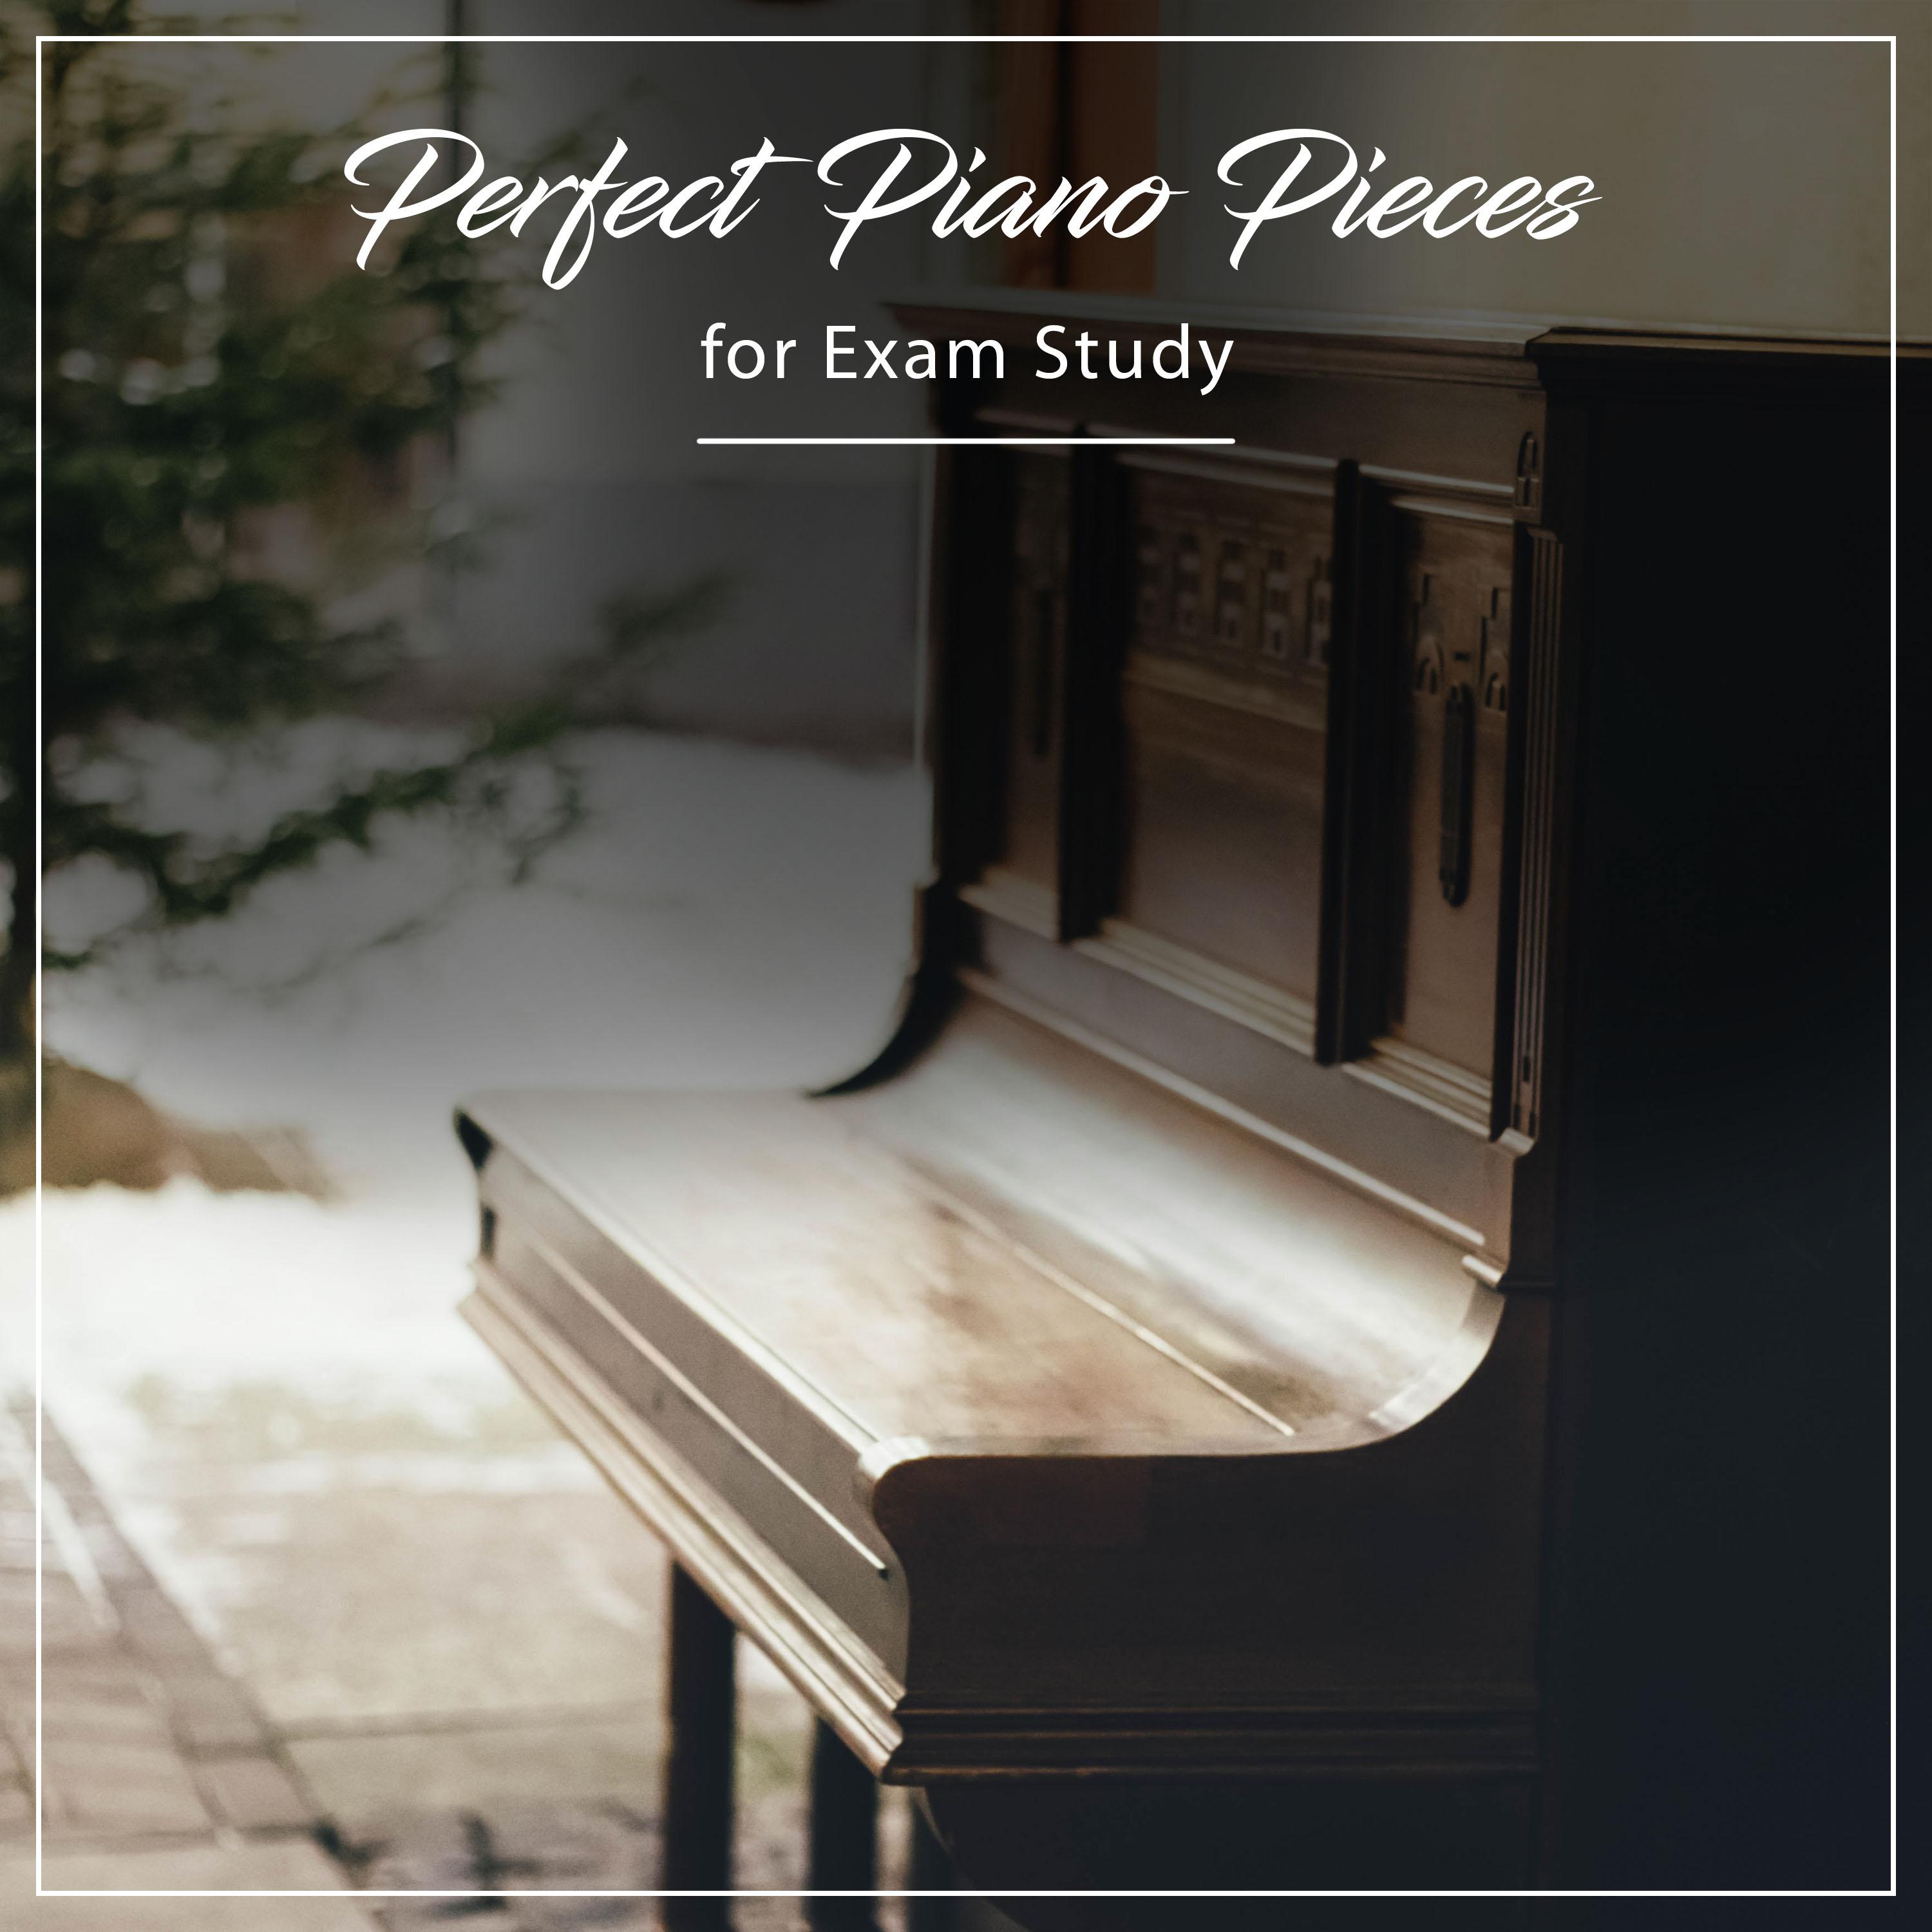 10 Perfect Piano Pieces for Exam Study